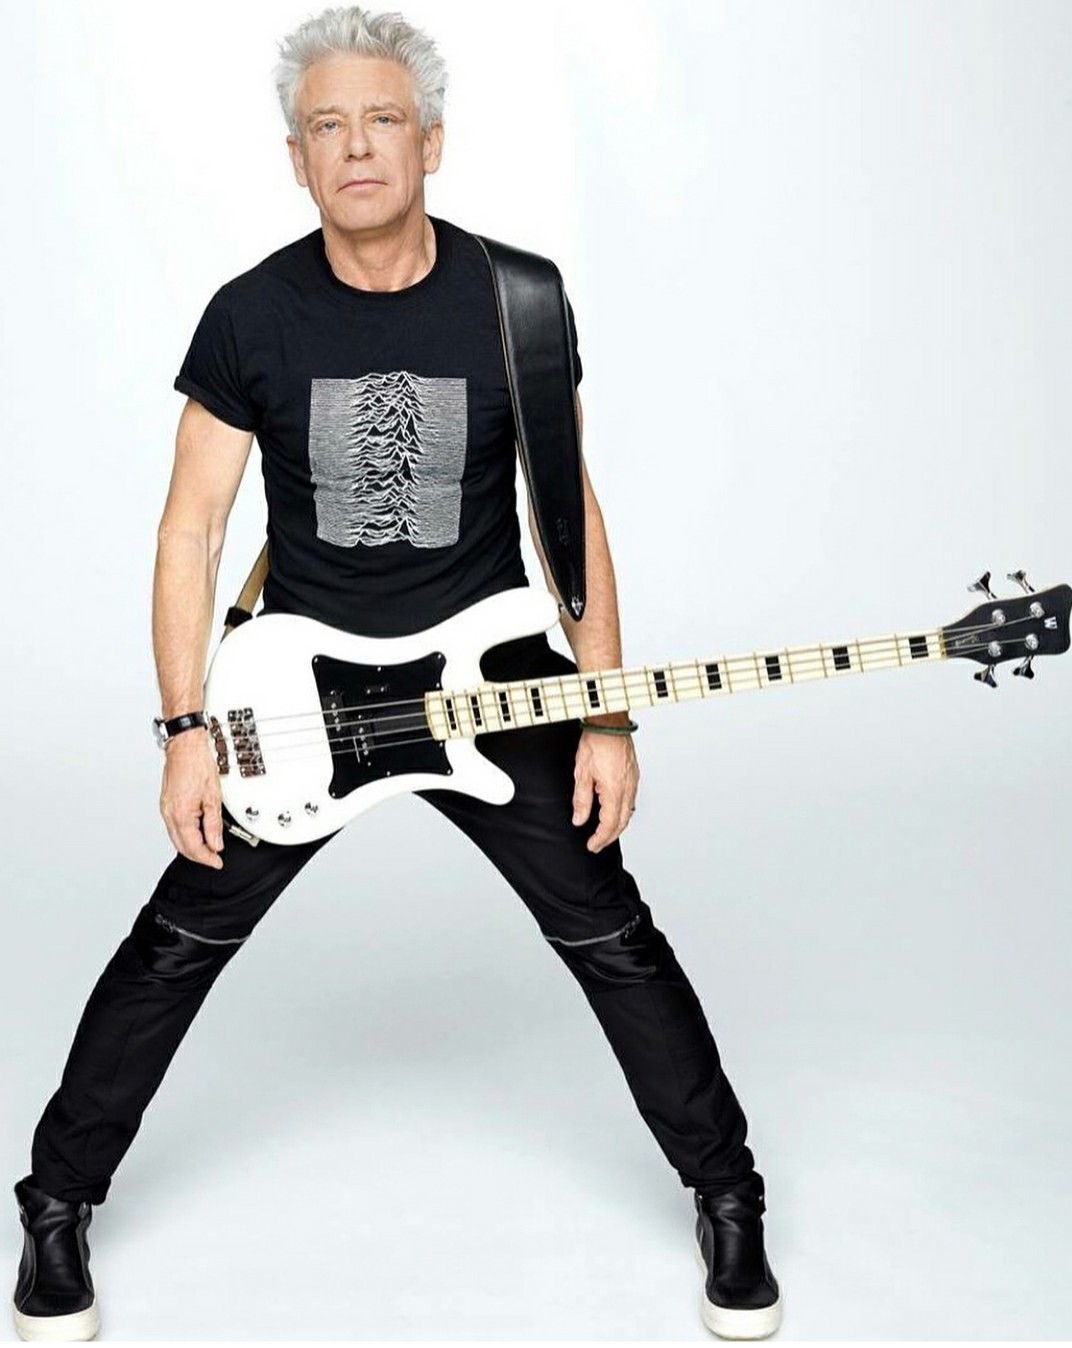 Also happy birthday to Adam Clayton from 